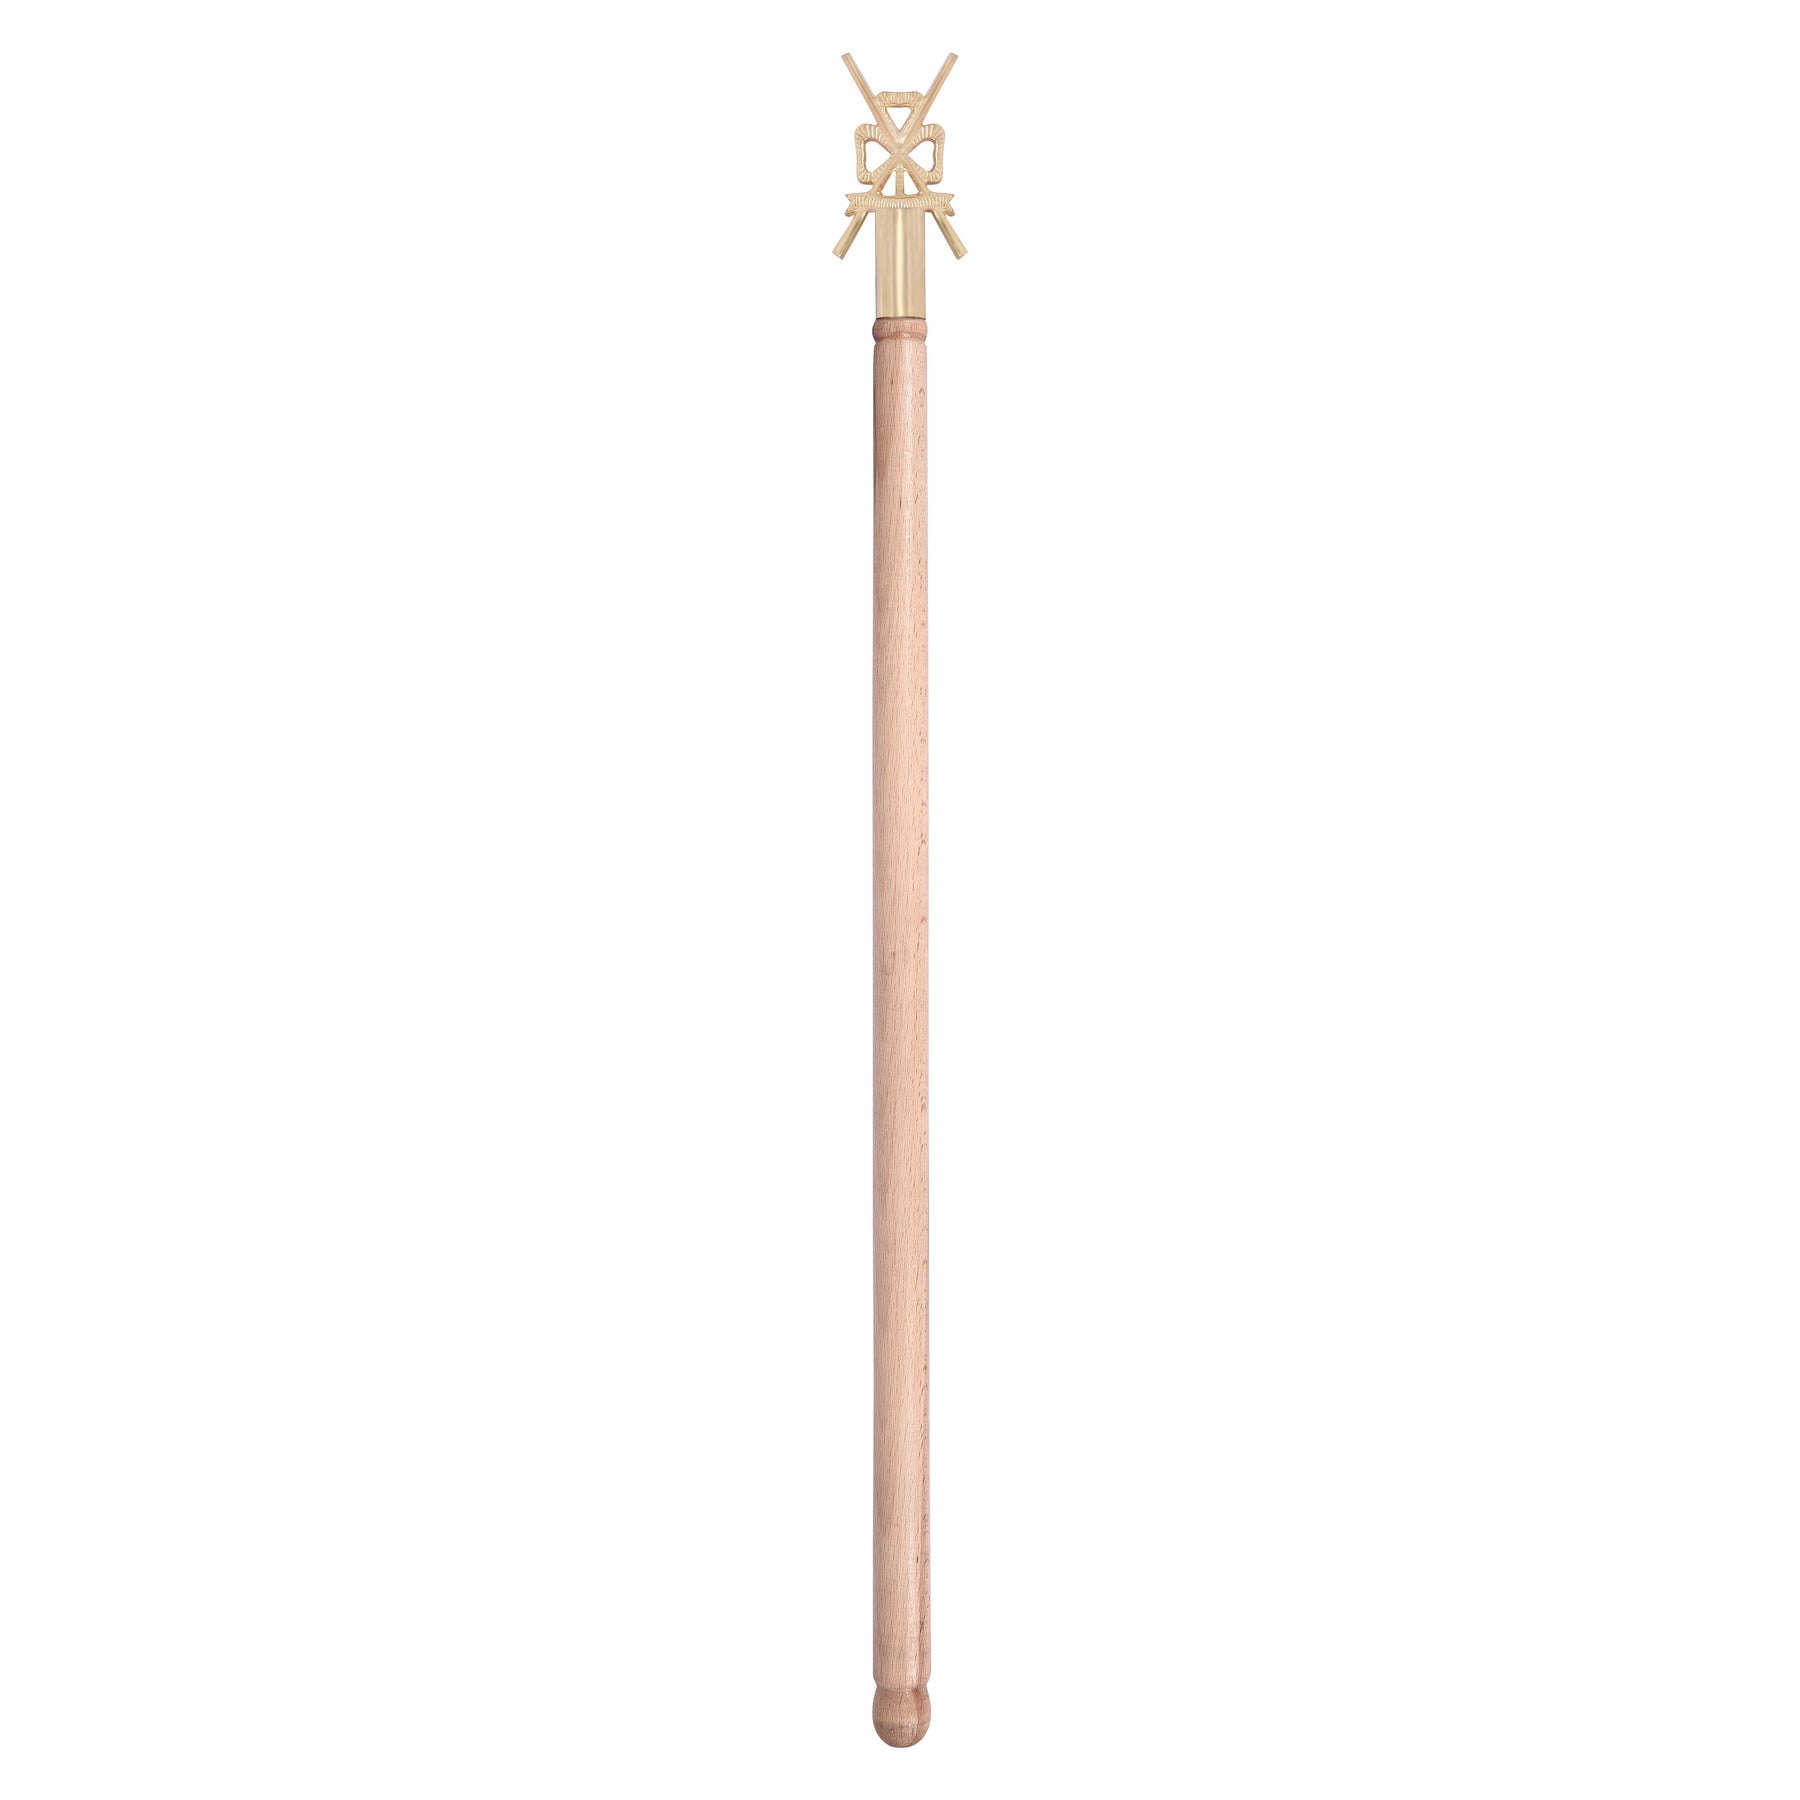 Commander Red Cross of Constantine Baton - Wooden Stick & Gold Plated